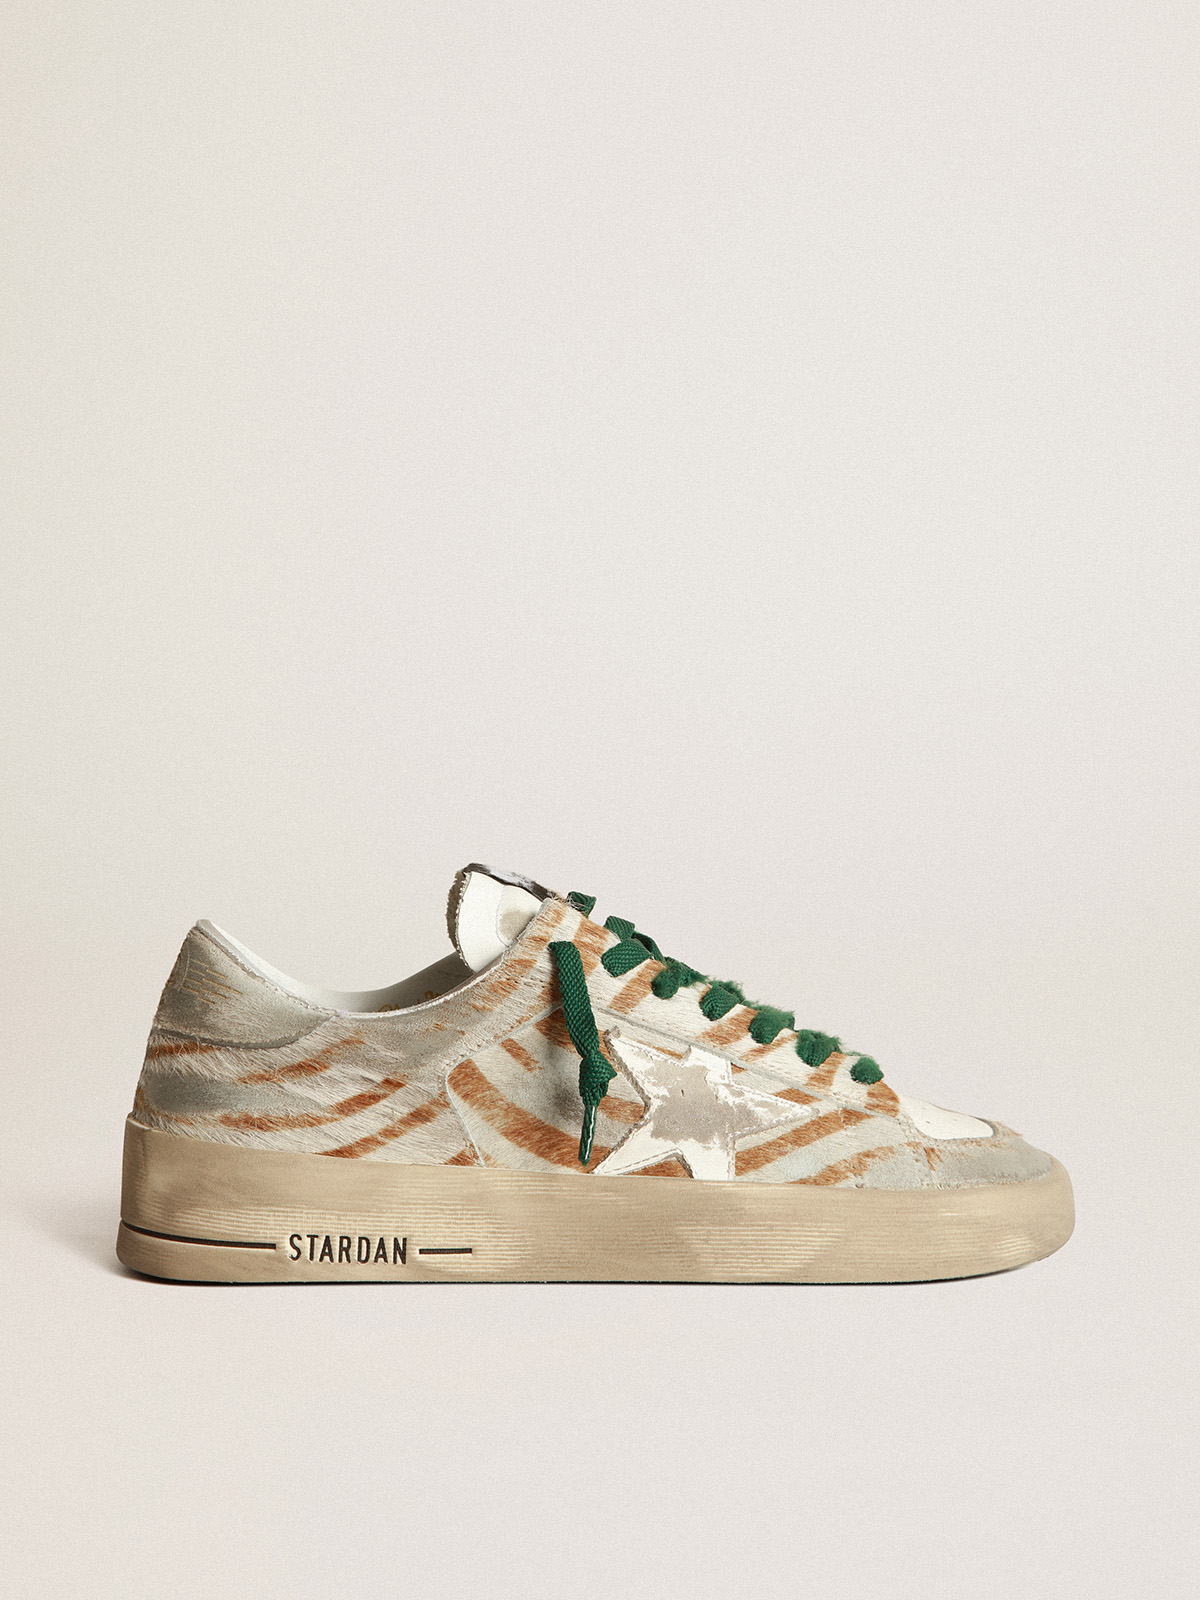 Stardan LTD sneakers in gray and brown zebra-print pony skin with glossy  white leather star and light gray suede heel tab | Golden Goose